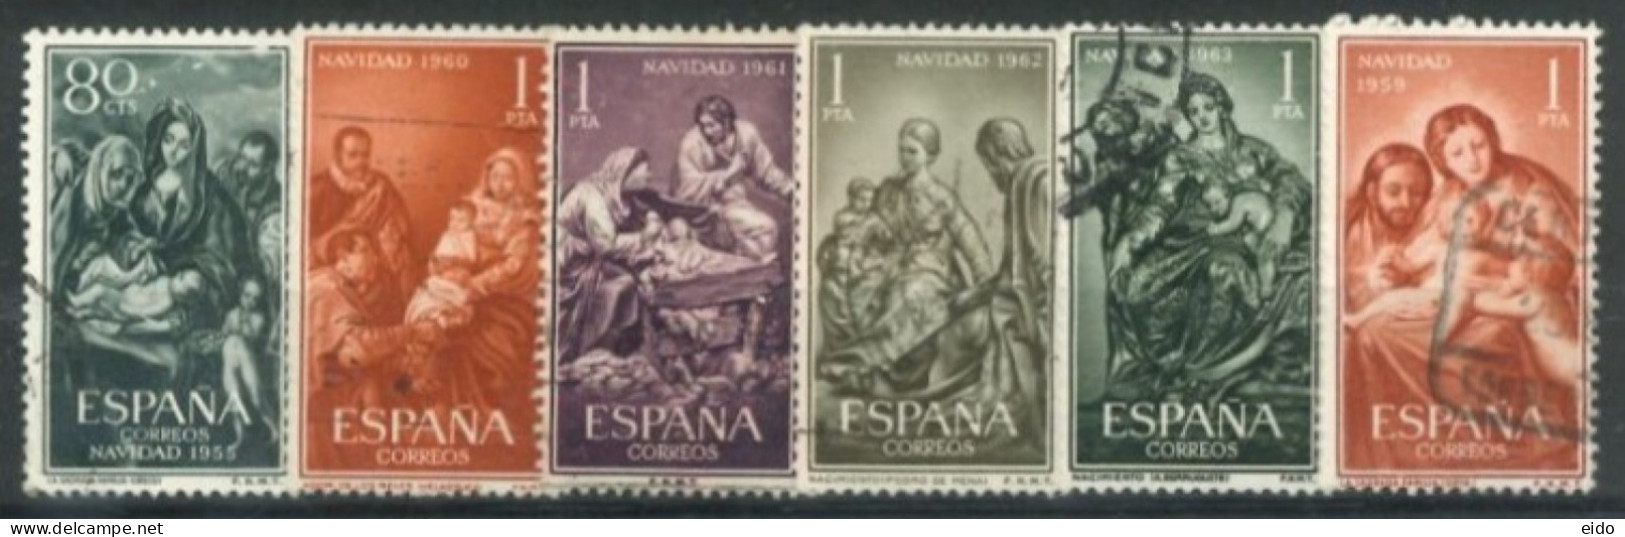 SPAIN, 1955/63, HOLY FAMILY STAMPS SET OF 6, USED. - Usados